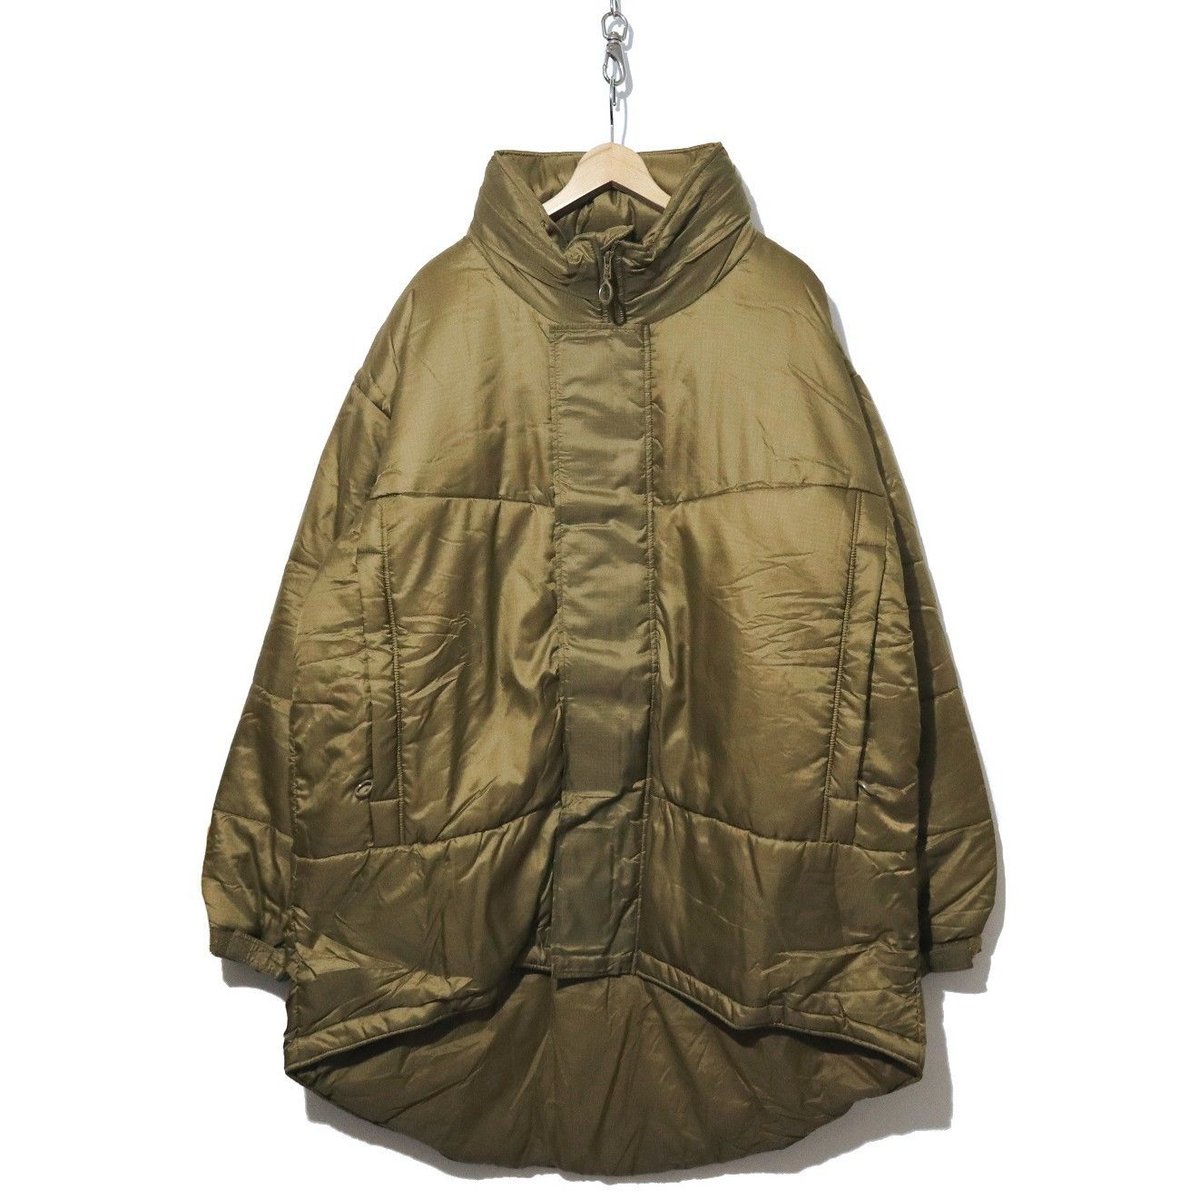 Deadstock Beyond Clothing A7 COLD PARKA "Monste